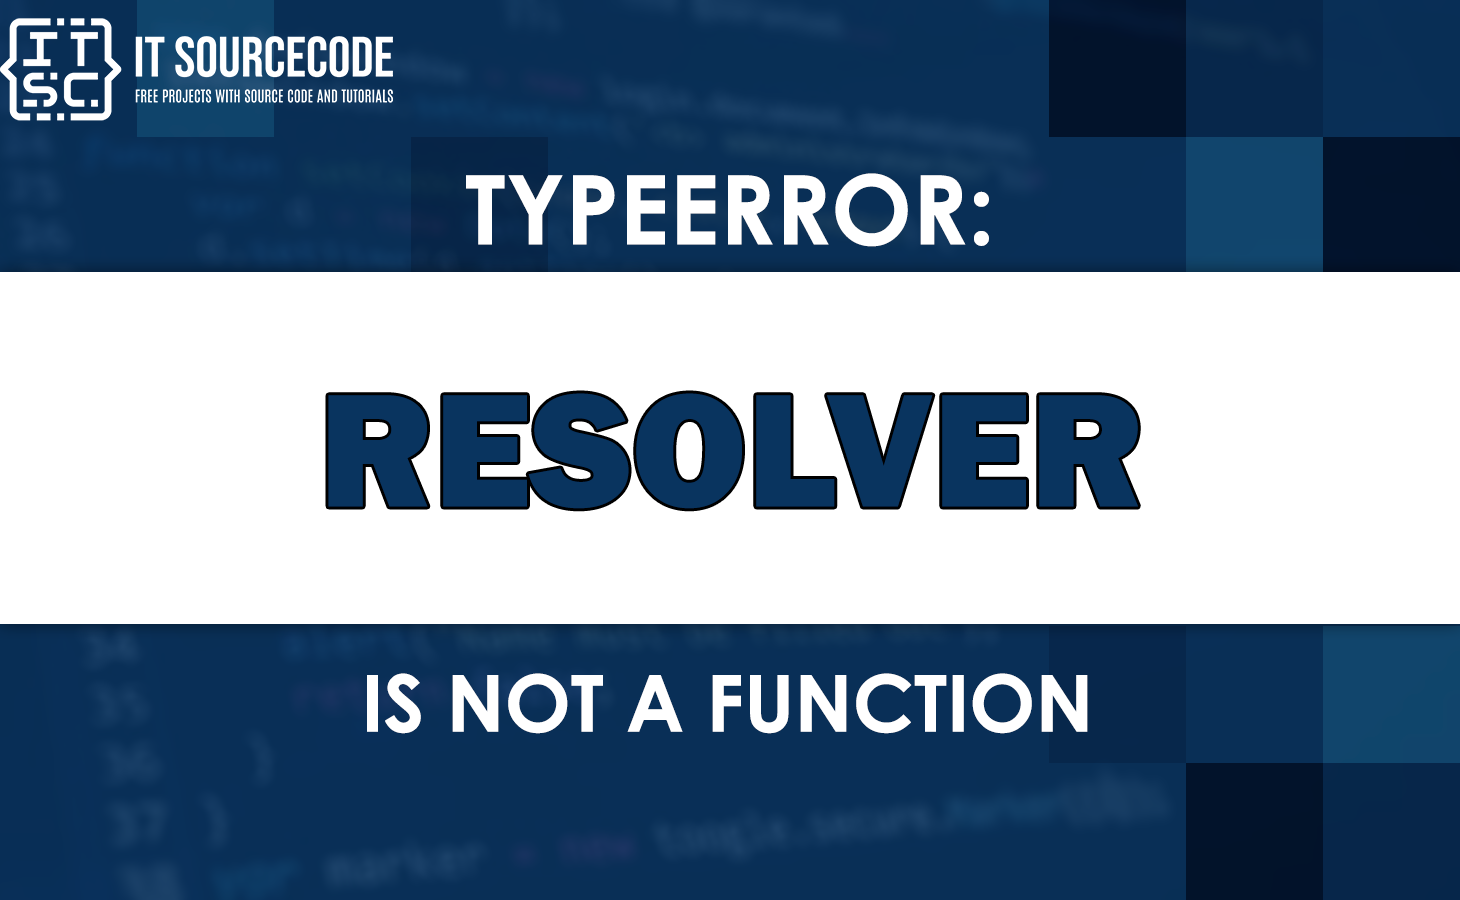 Typeerror: resolver is not a function [SOLVED]